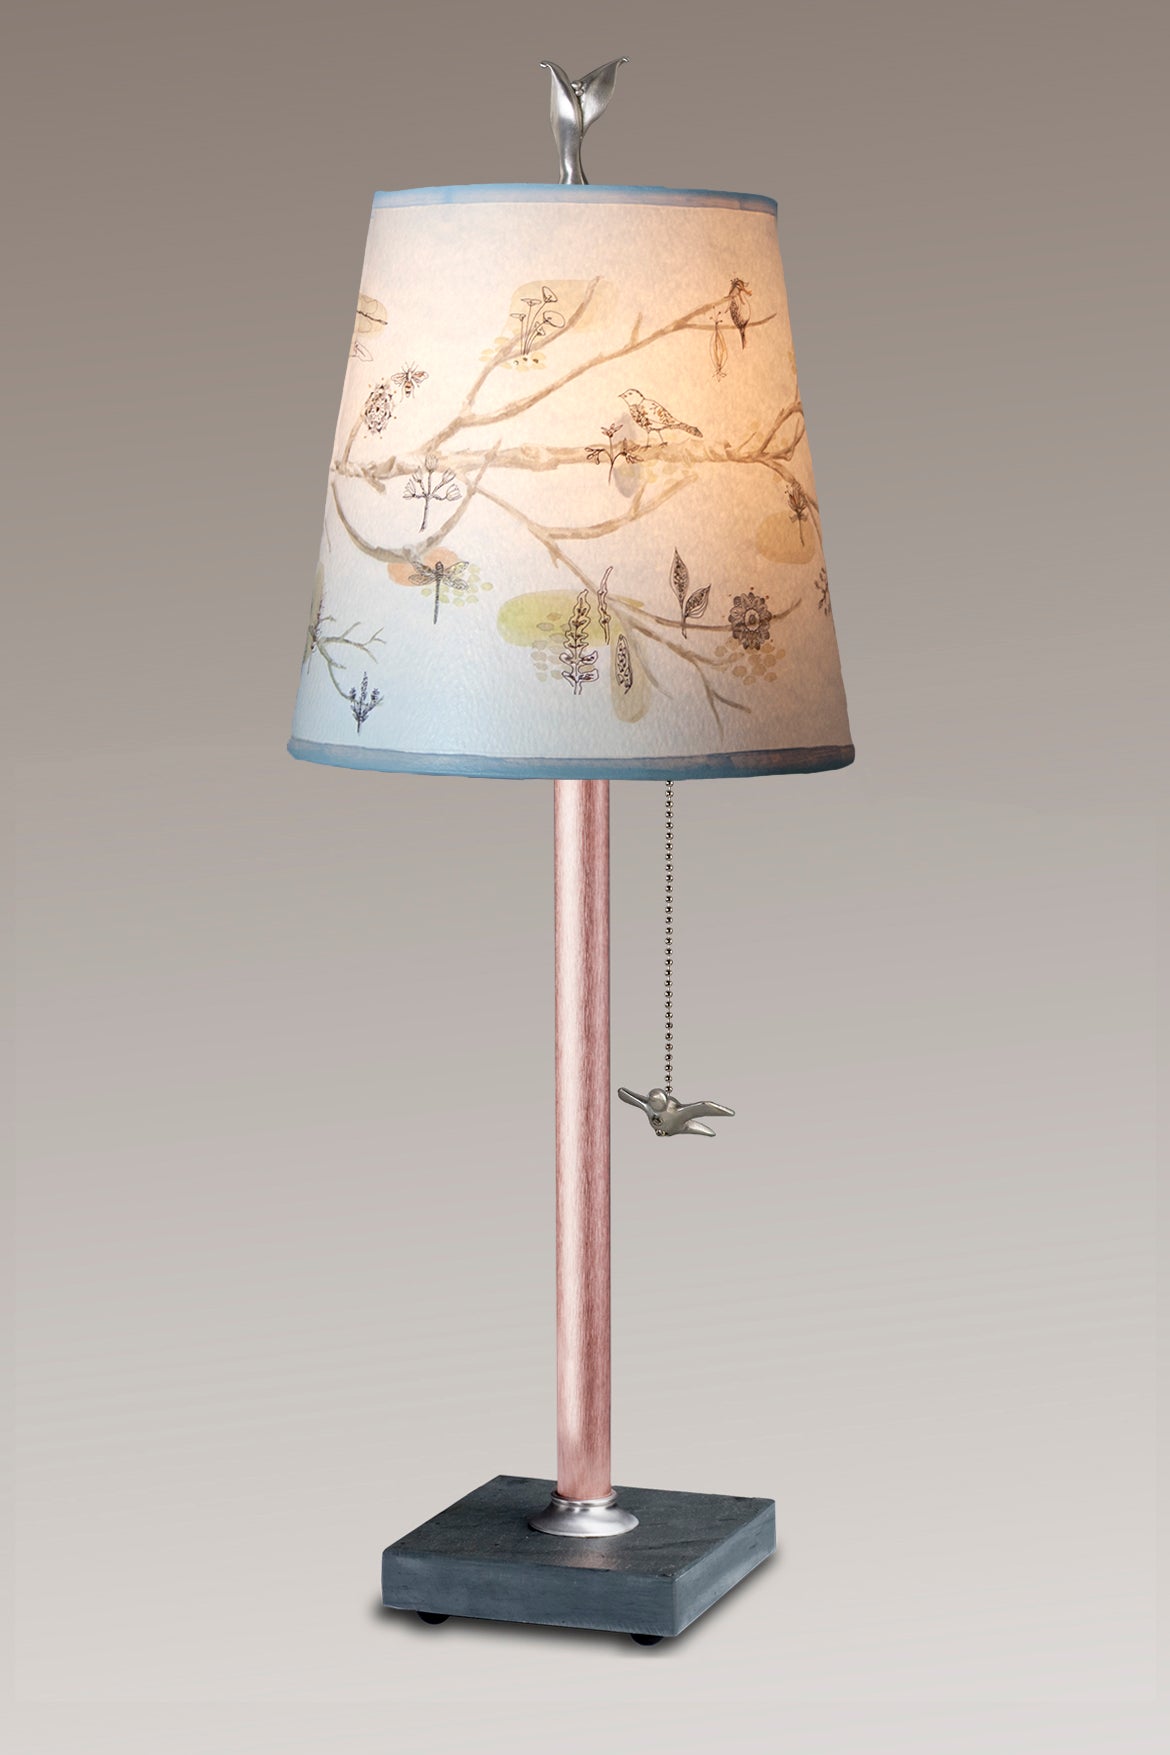 Janna Ugone & Co Table Lamps Copper Table Lamp with Small Drum Shade in Artful Branch